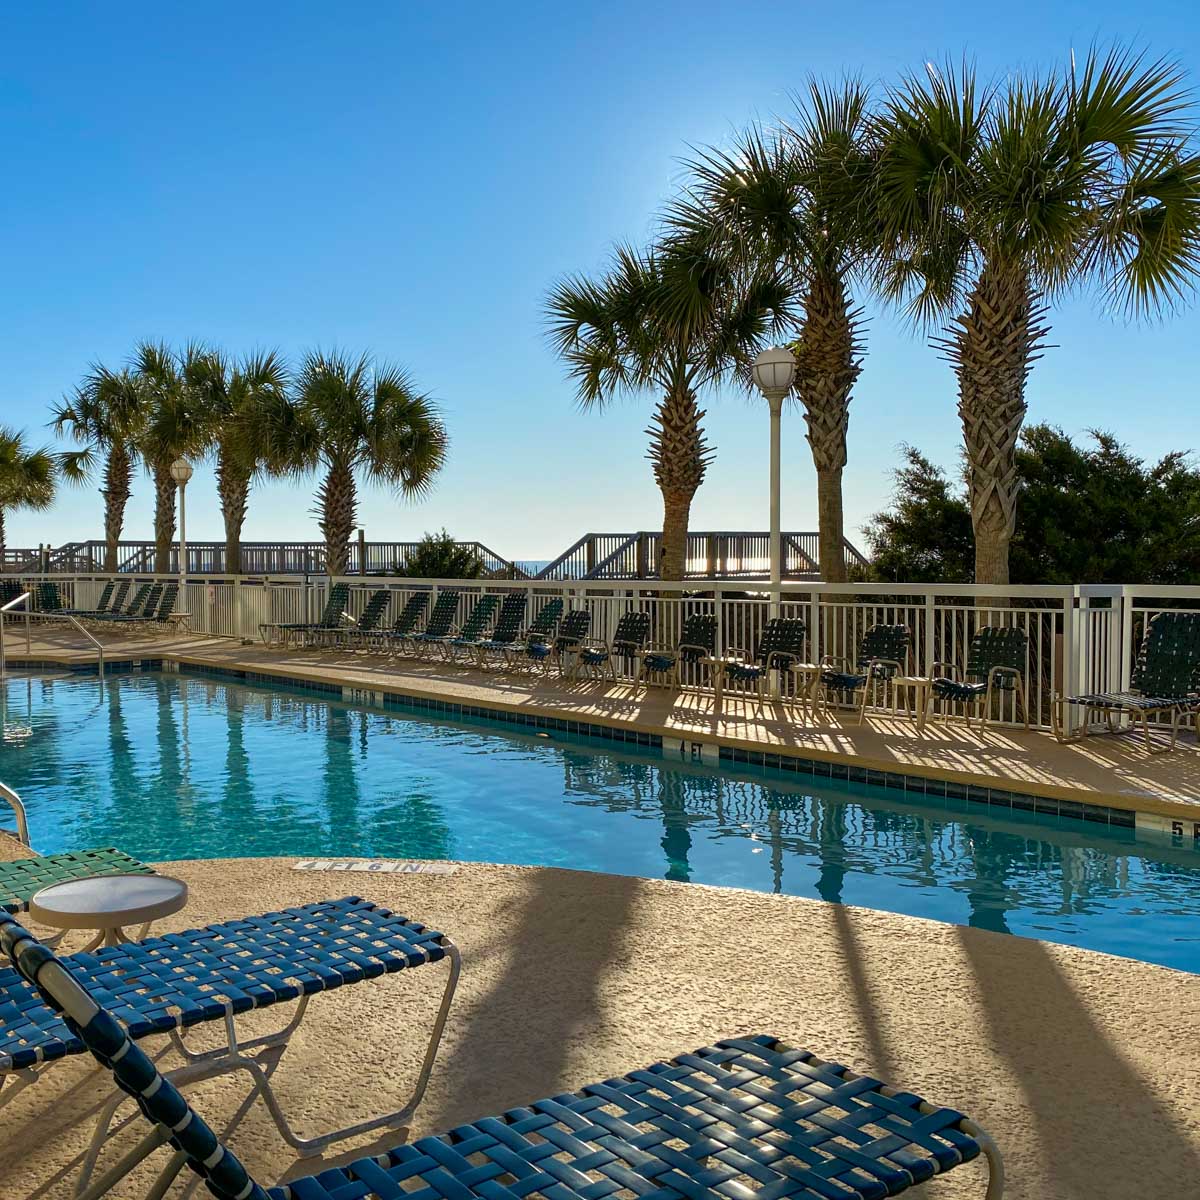 A condo pool is surrounded by palm trees.